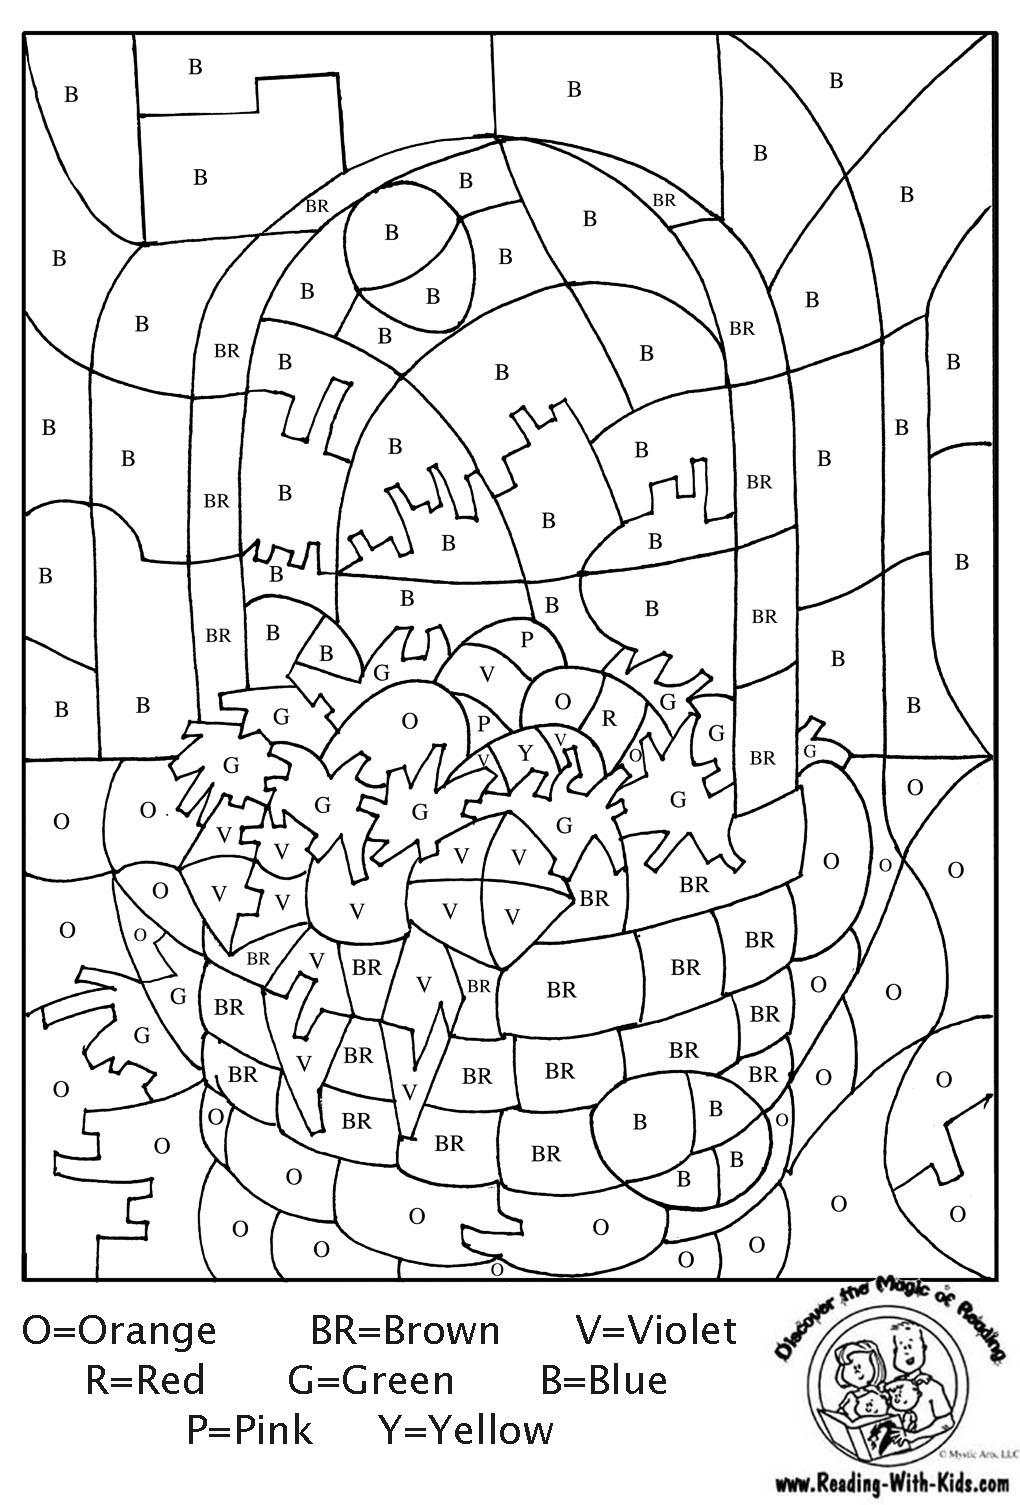 7 Best Images of Maze Worksheets For Teens - Christmas Tree Maze